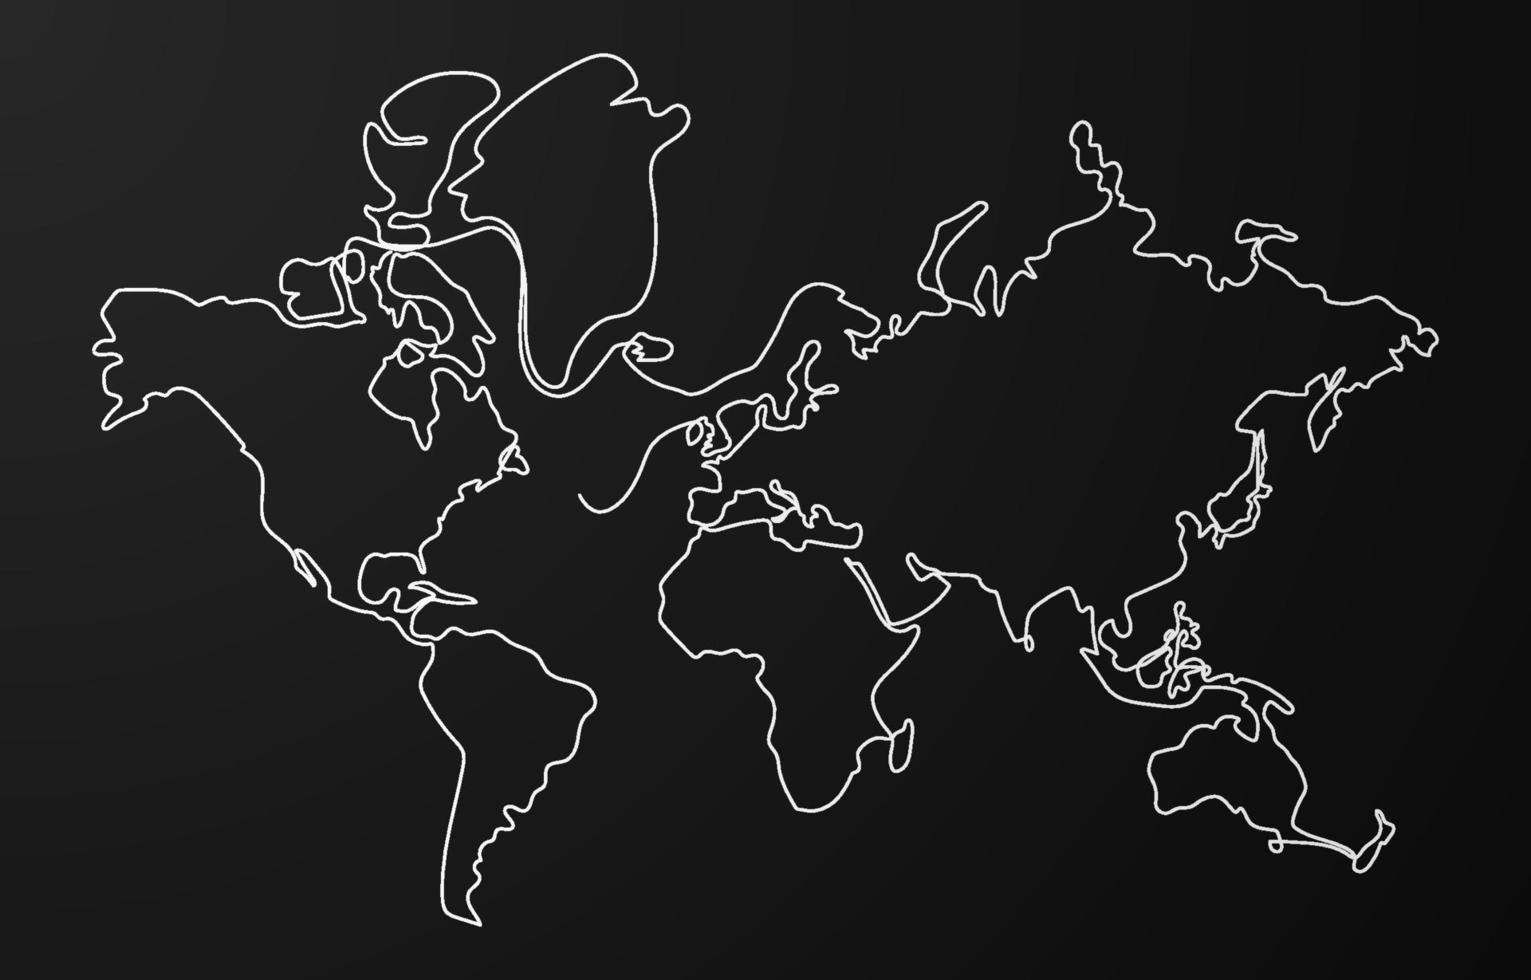 One Line Art World Map Background vector